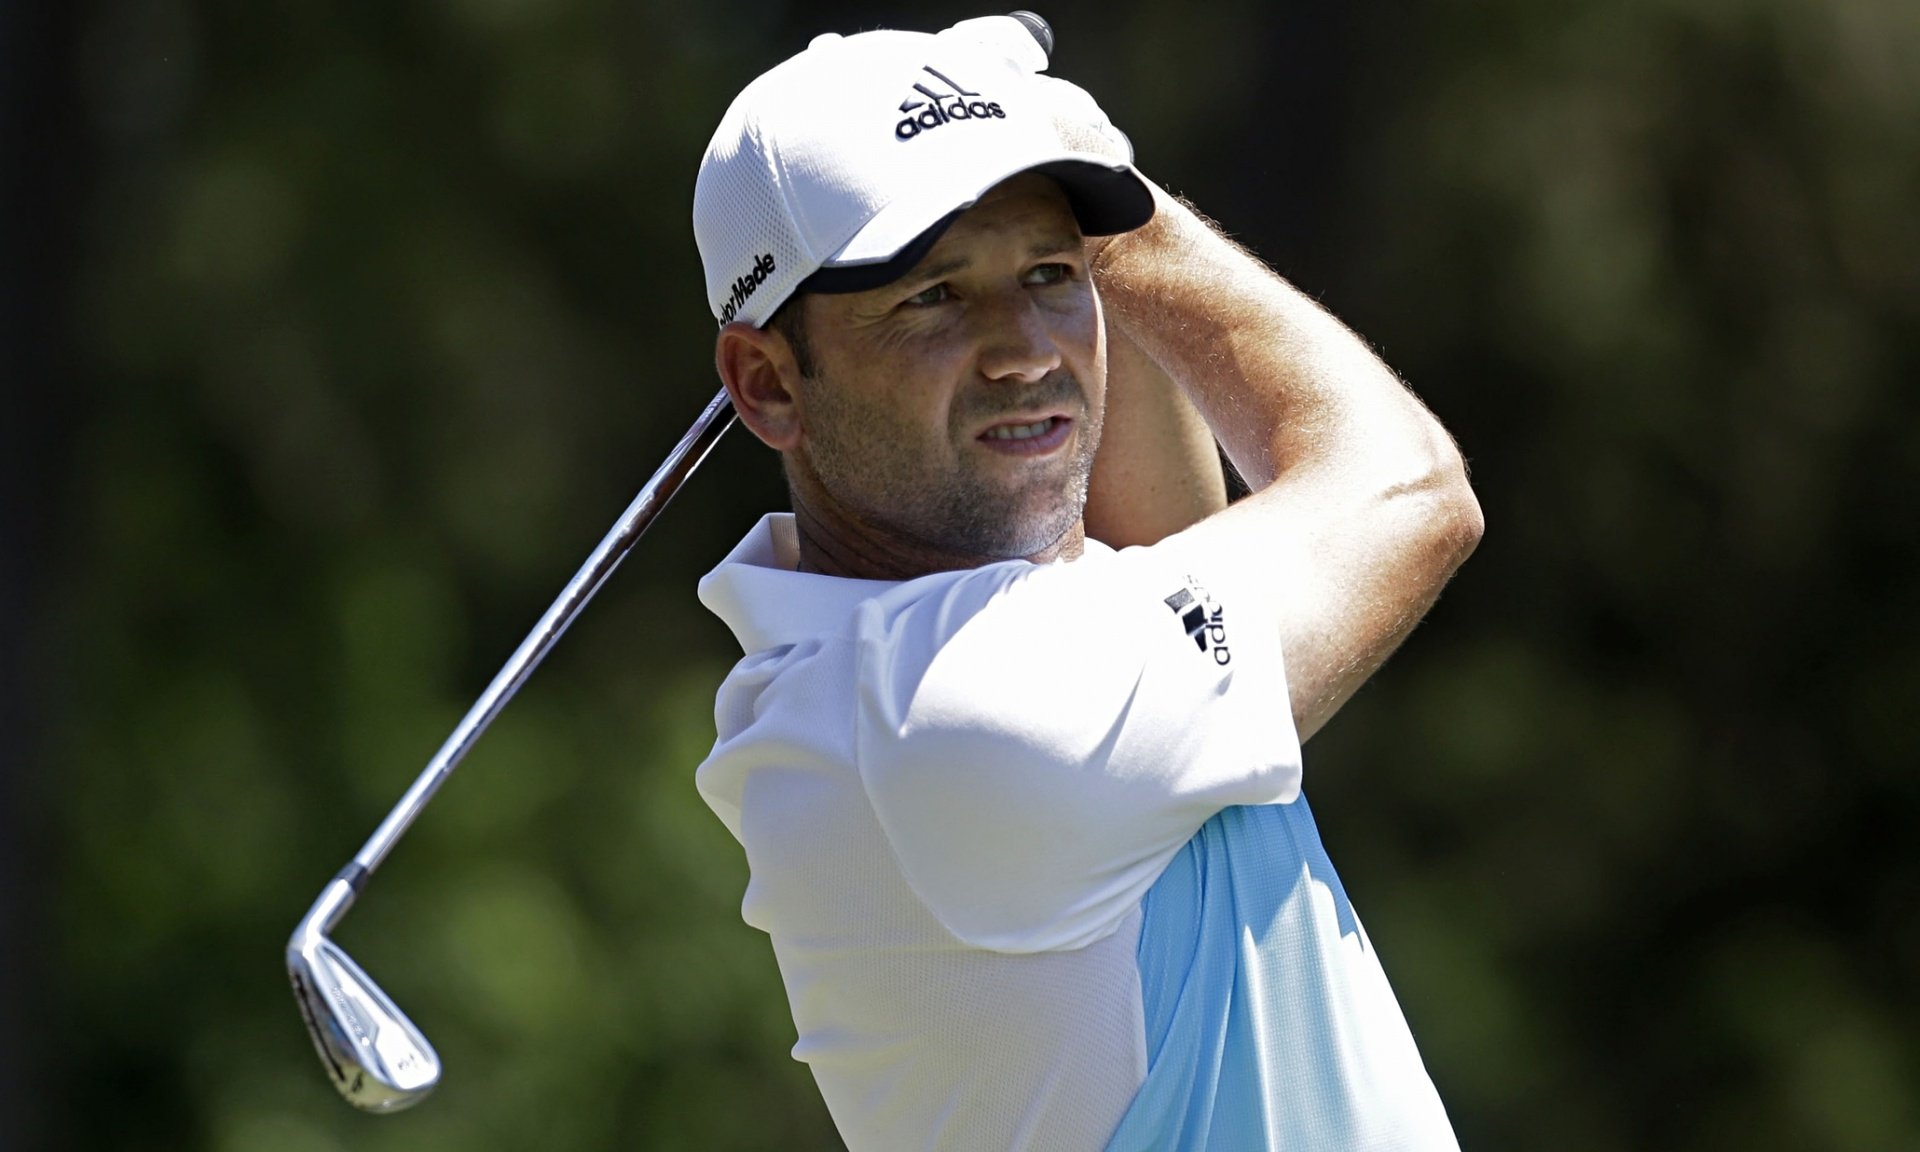 Sergio García moves into contention in tight Players Championship battle 